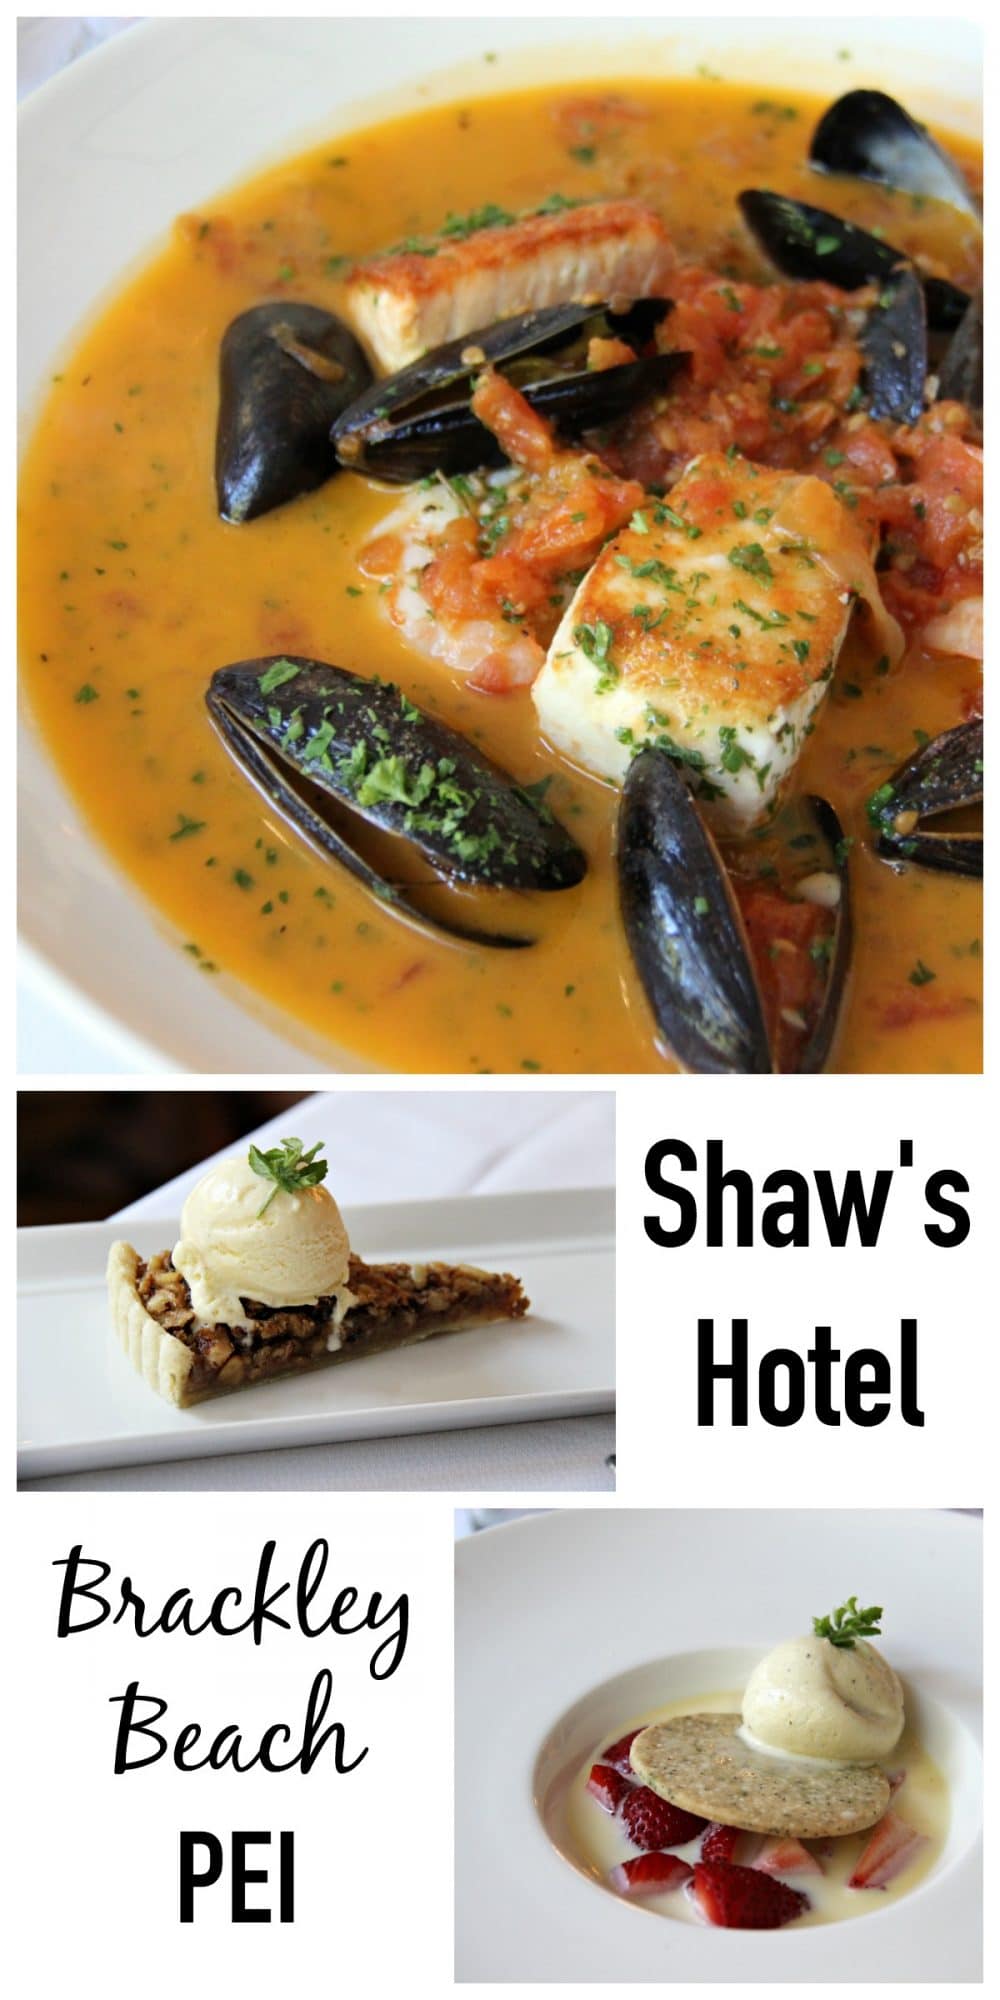 Dining at Shaw's Hotel